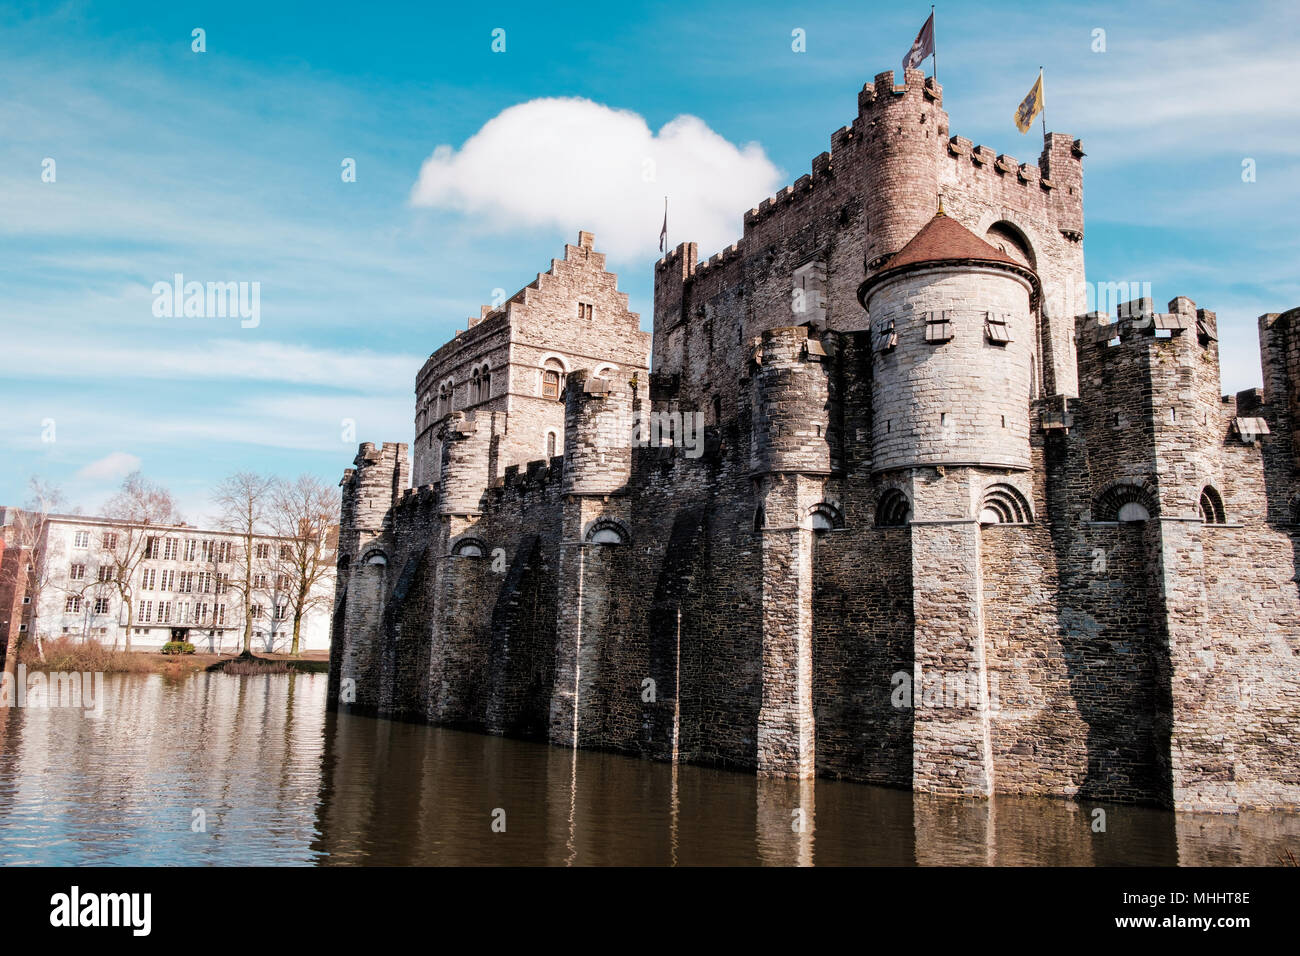 The Castle of the Counts, built in 1180 by count Philip of Alsace, surrounded by water in the city center of Ghent on a sunny day under a blue sky. Stock Photo